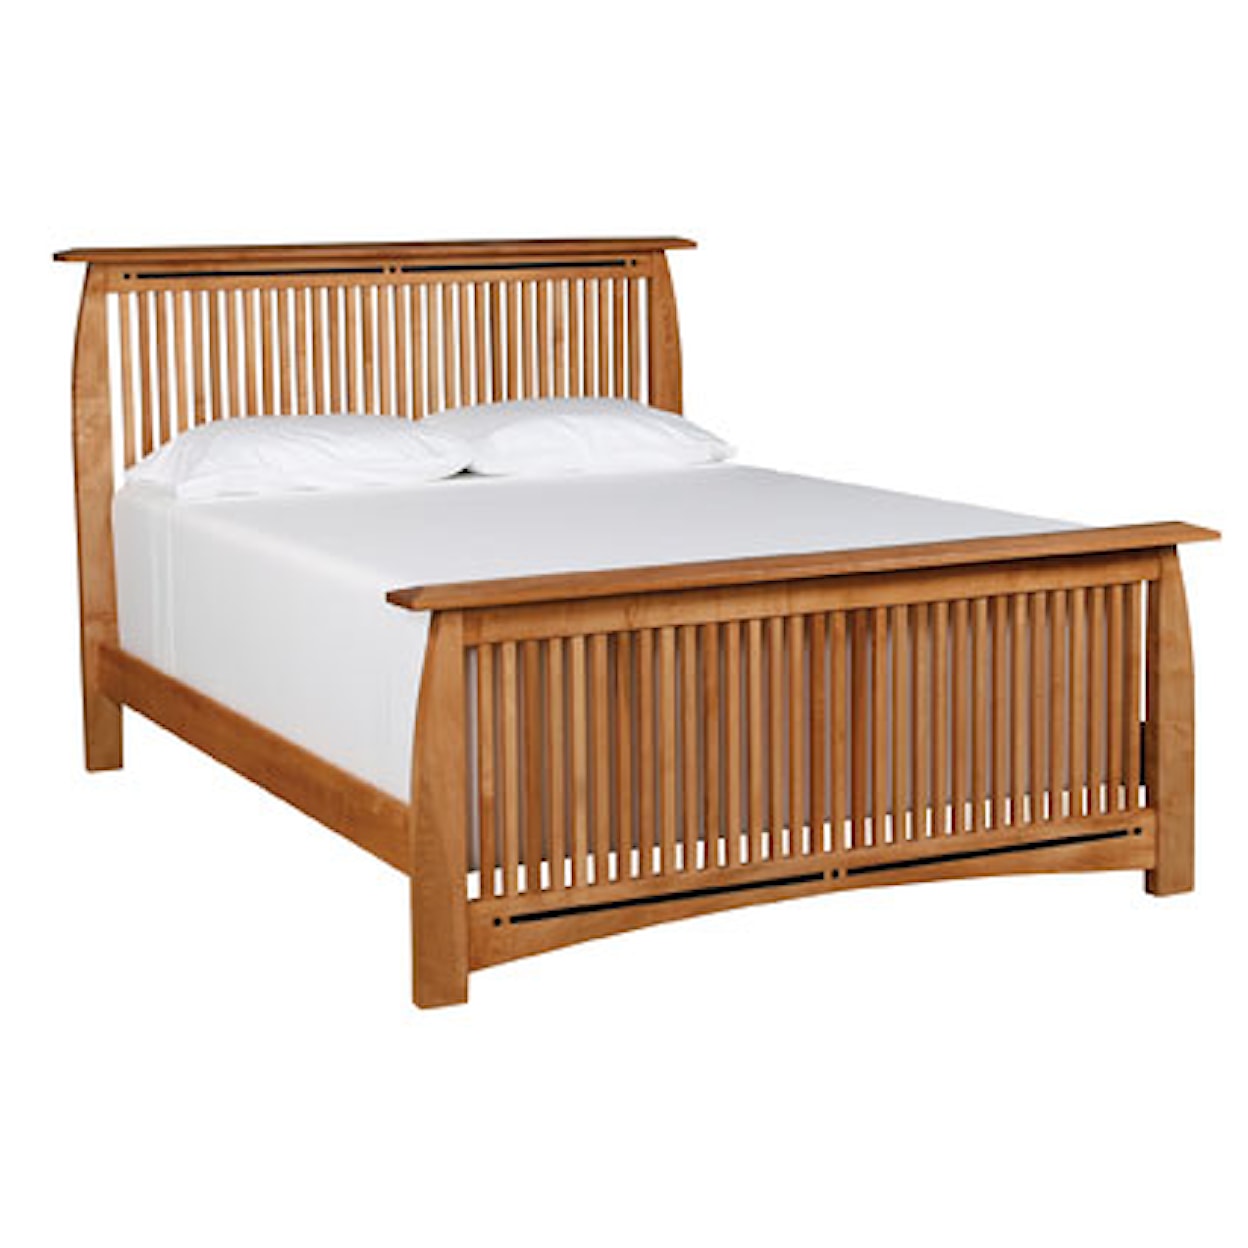 Simply Amish Aspen Queen Spindle Bed